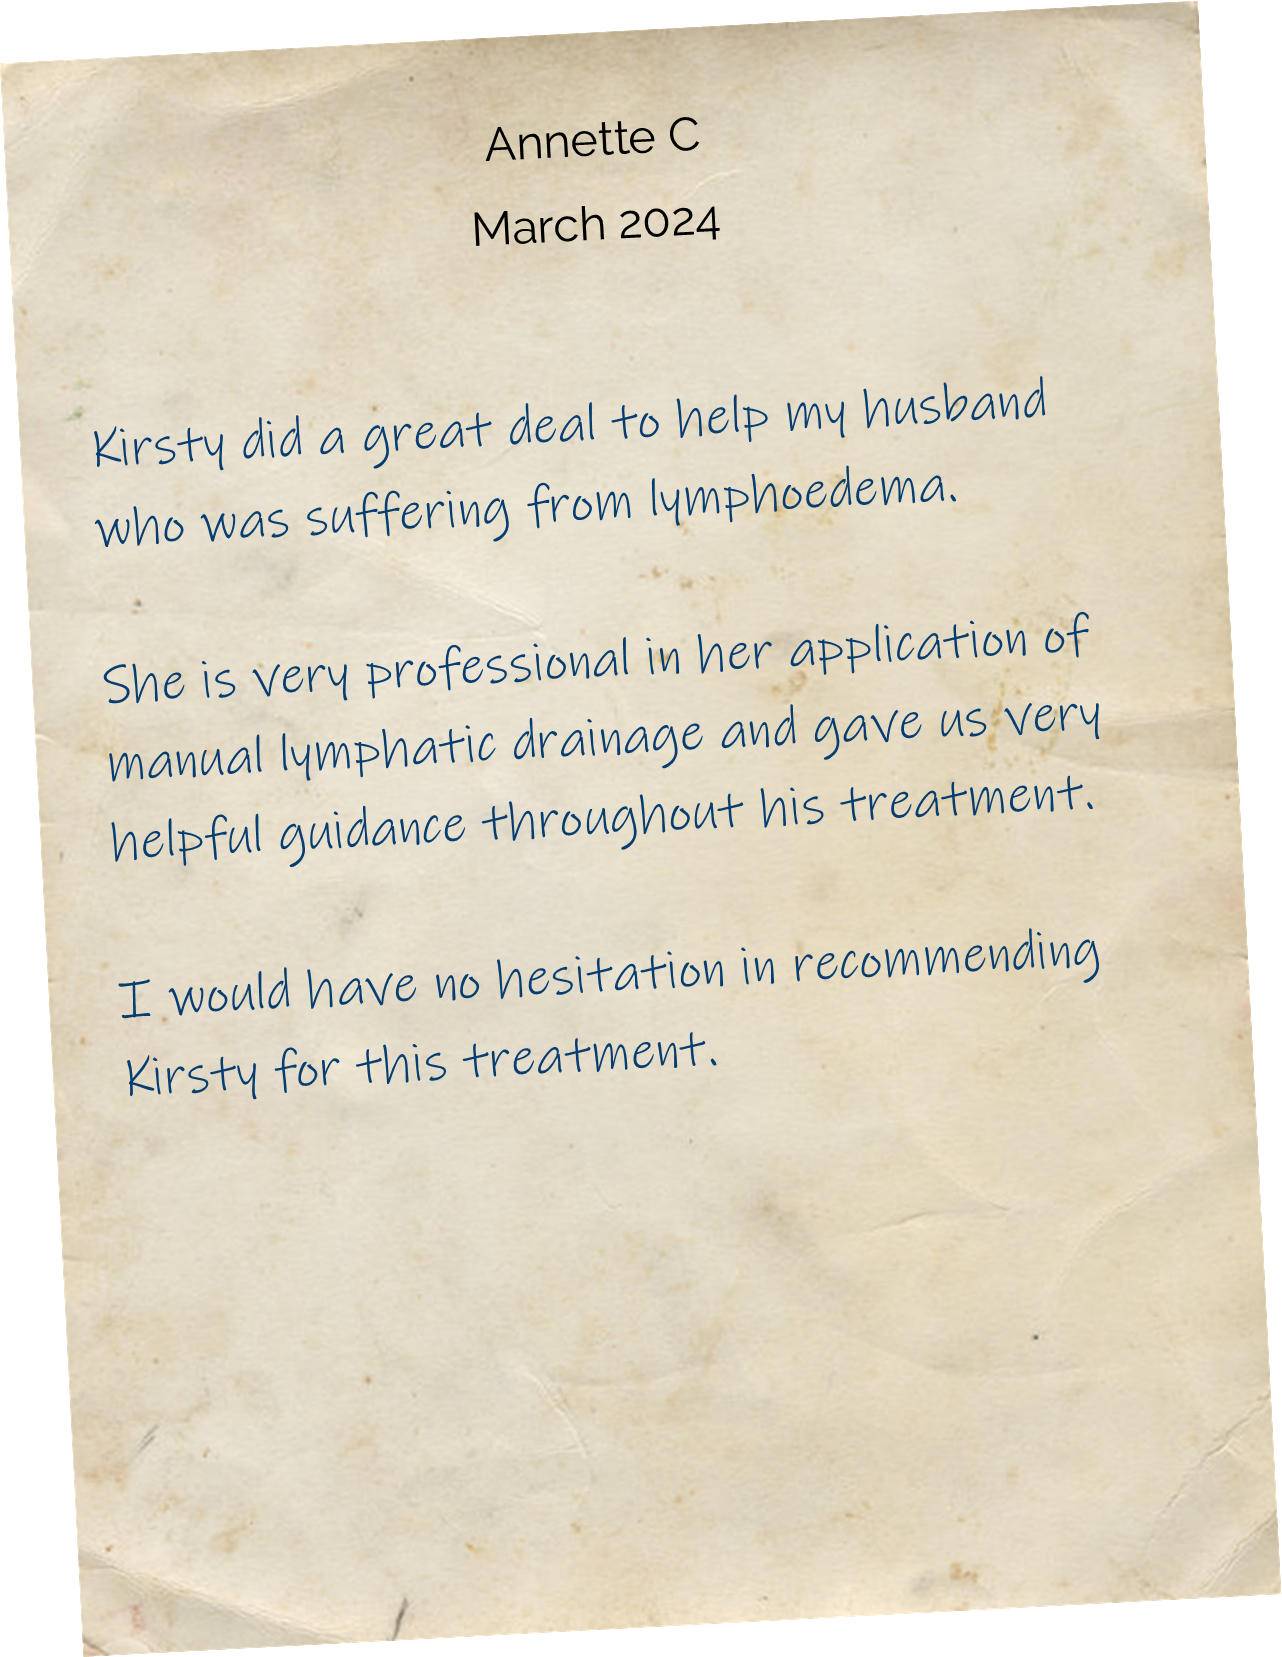 Kirsty did a great deal to help my husband who was suffering from lymphoedema. She is very professional in her application of manual lymphatic drainage and gave us very helpful guidance throughout his treatment. I would have no hesitation in recommending Kirsty for this treatment.